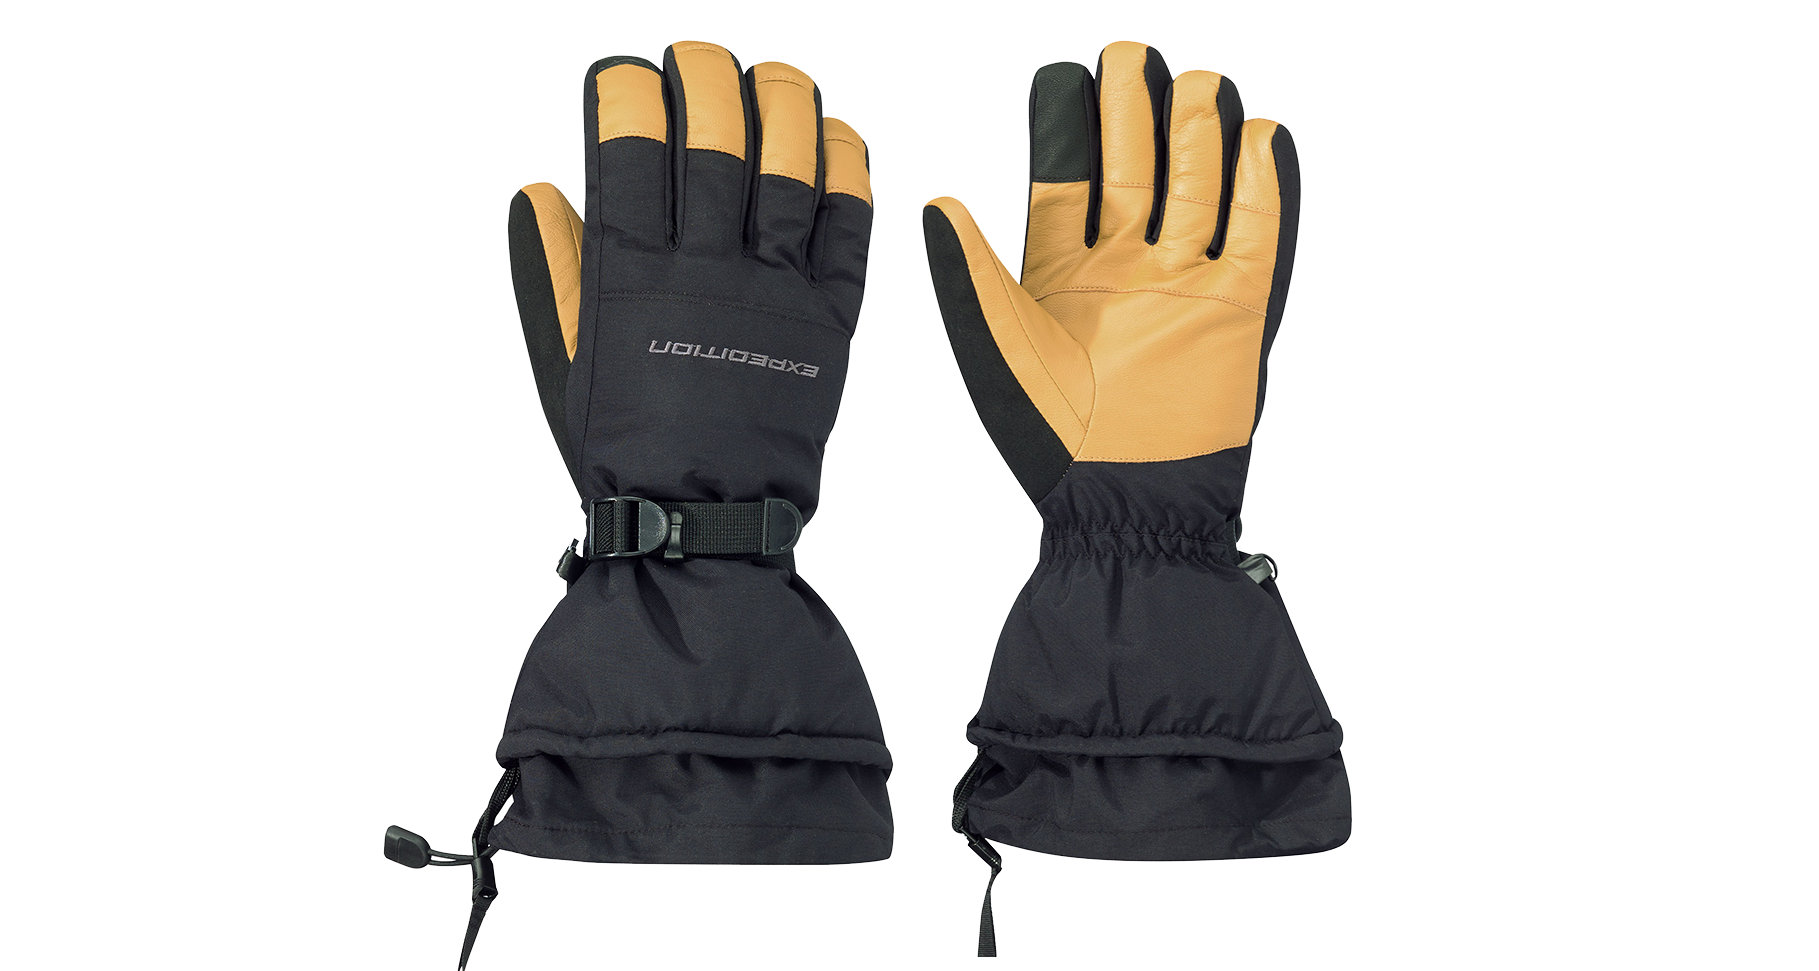 The Expedition Glove is built extra durable and warm to keep you comfortable during full days of work or play.